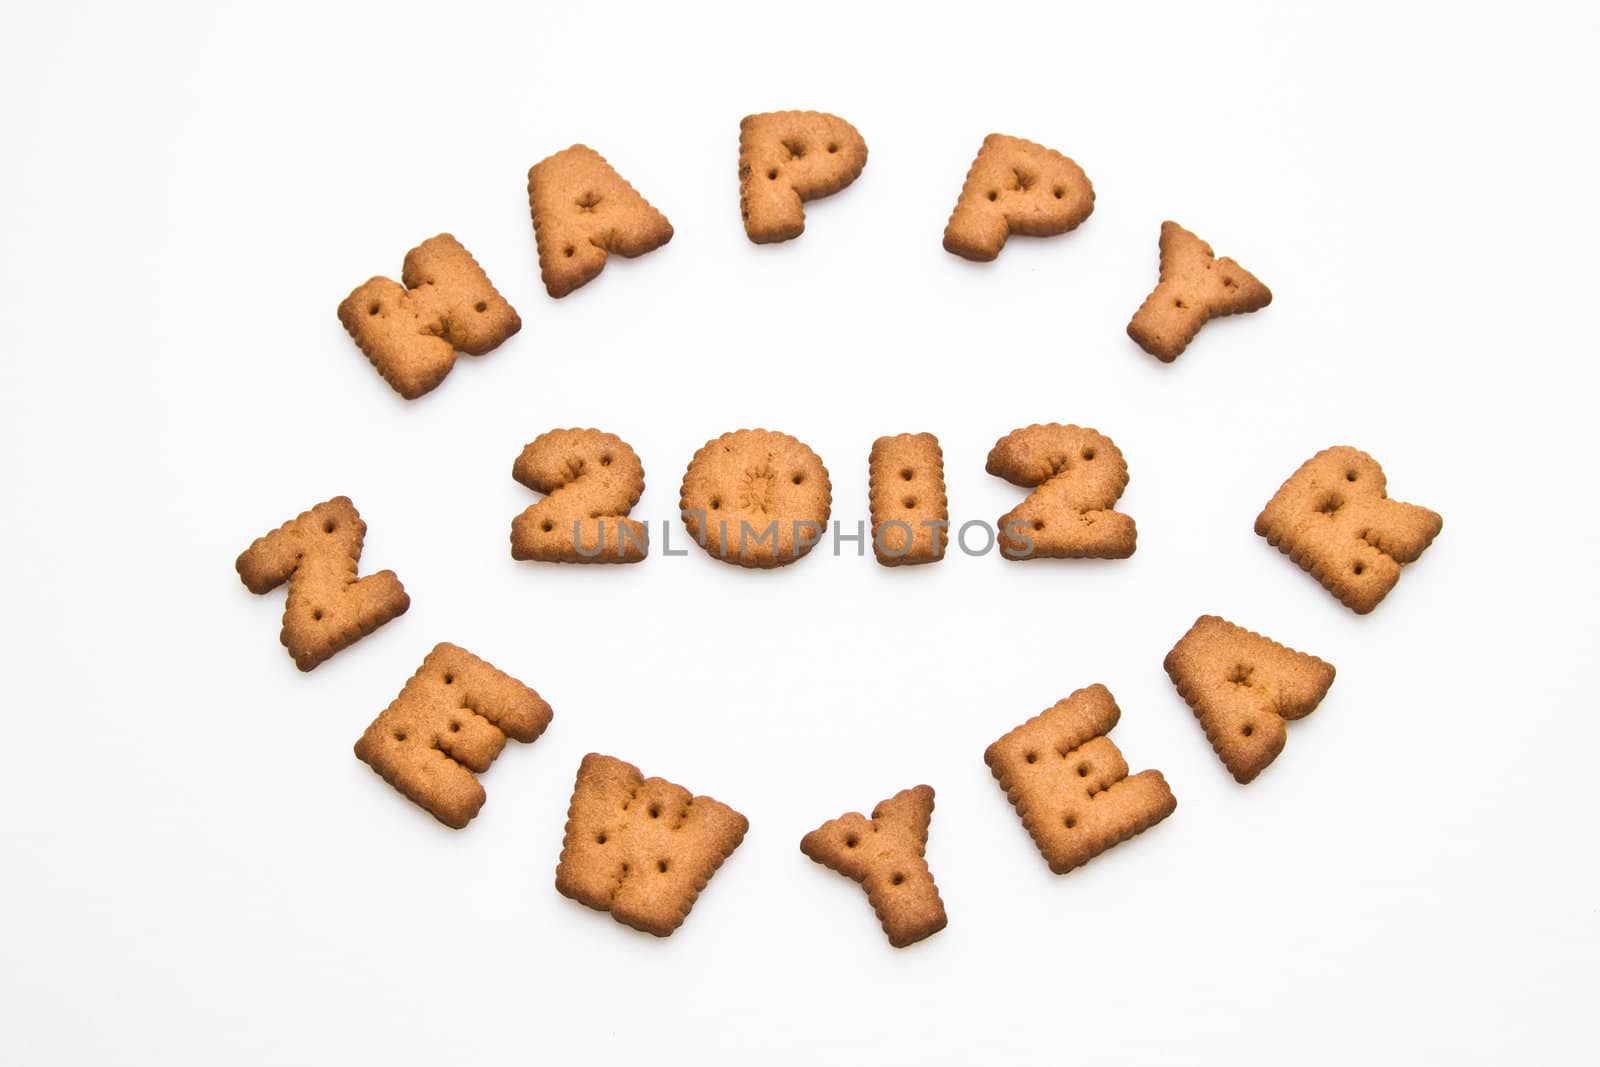 Happy New Year  2012 greeting words made by brown biscuits in center of white surface in landscape orientation for background use